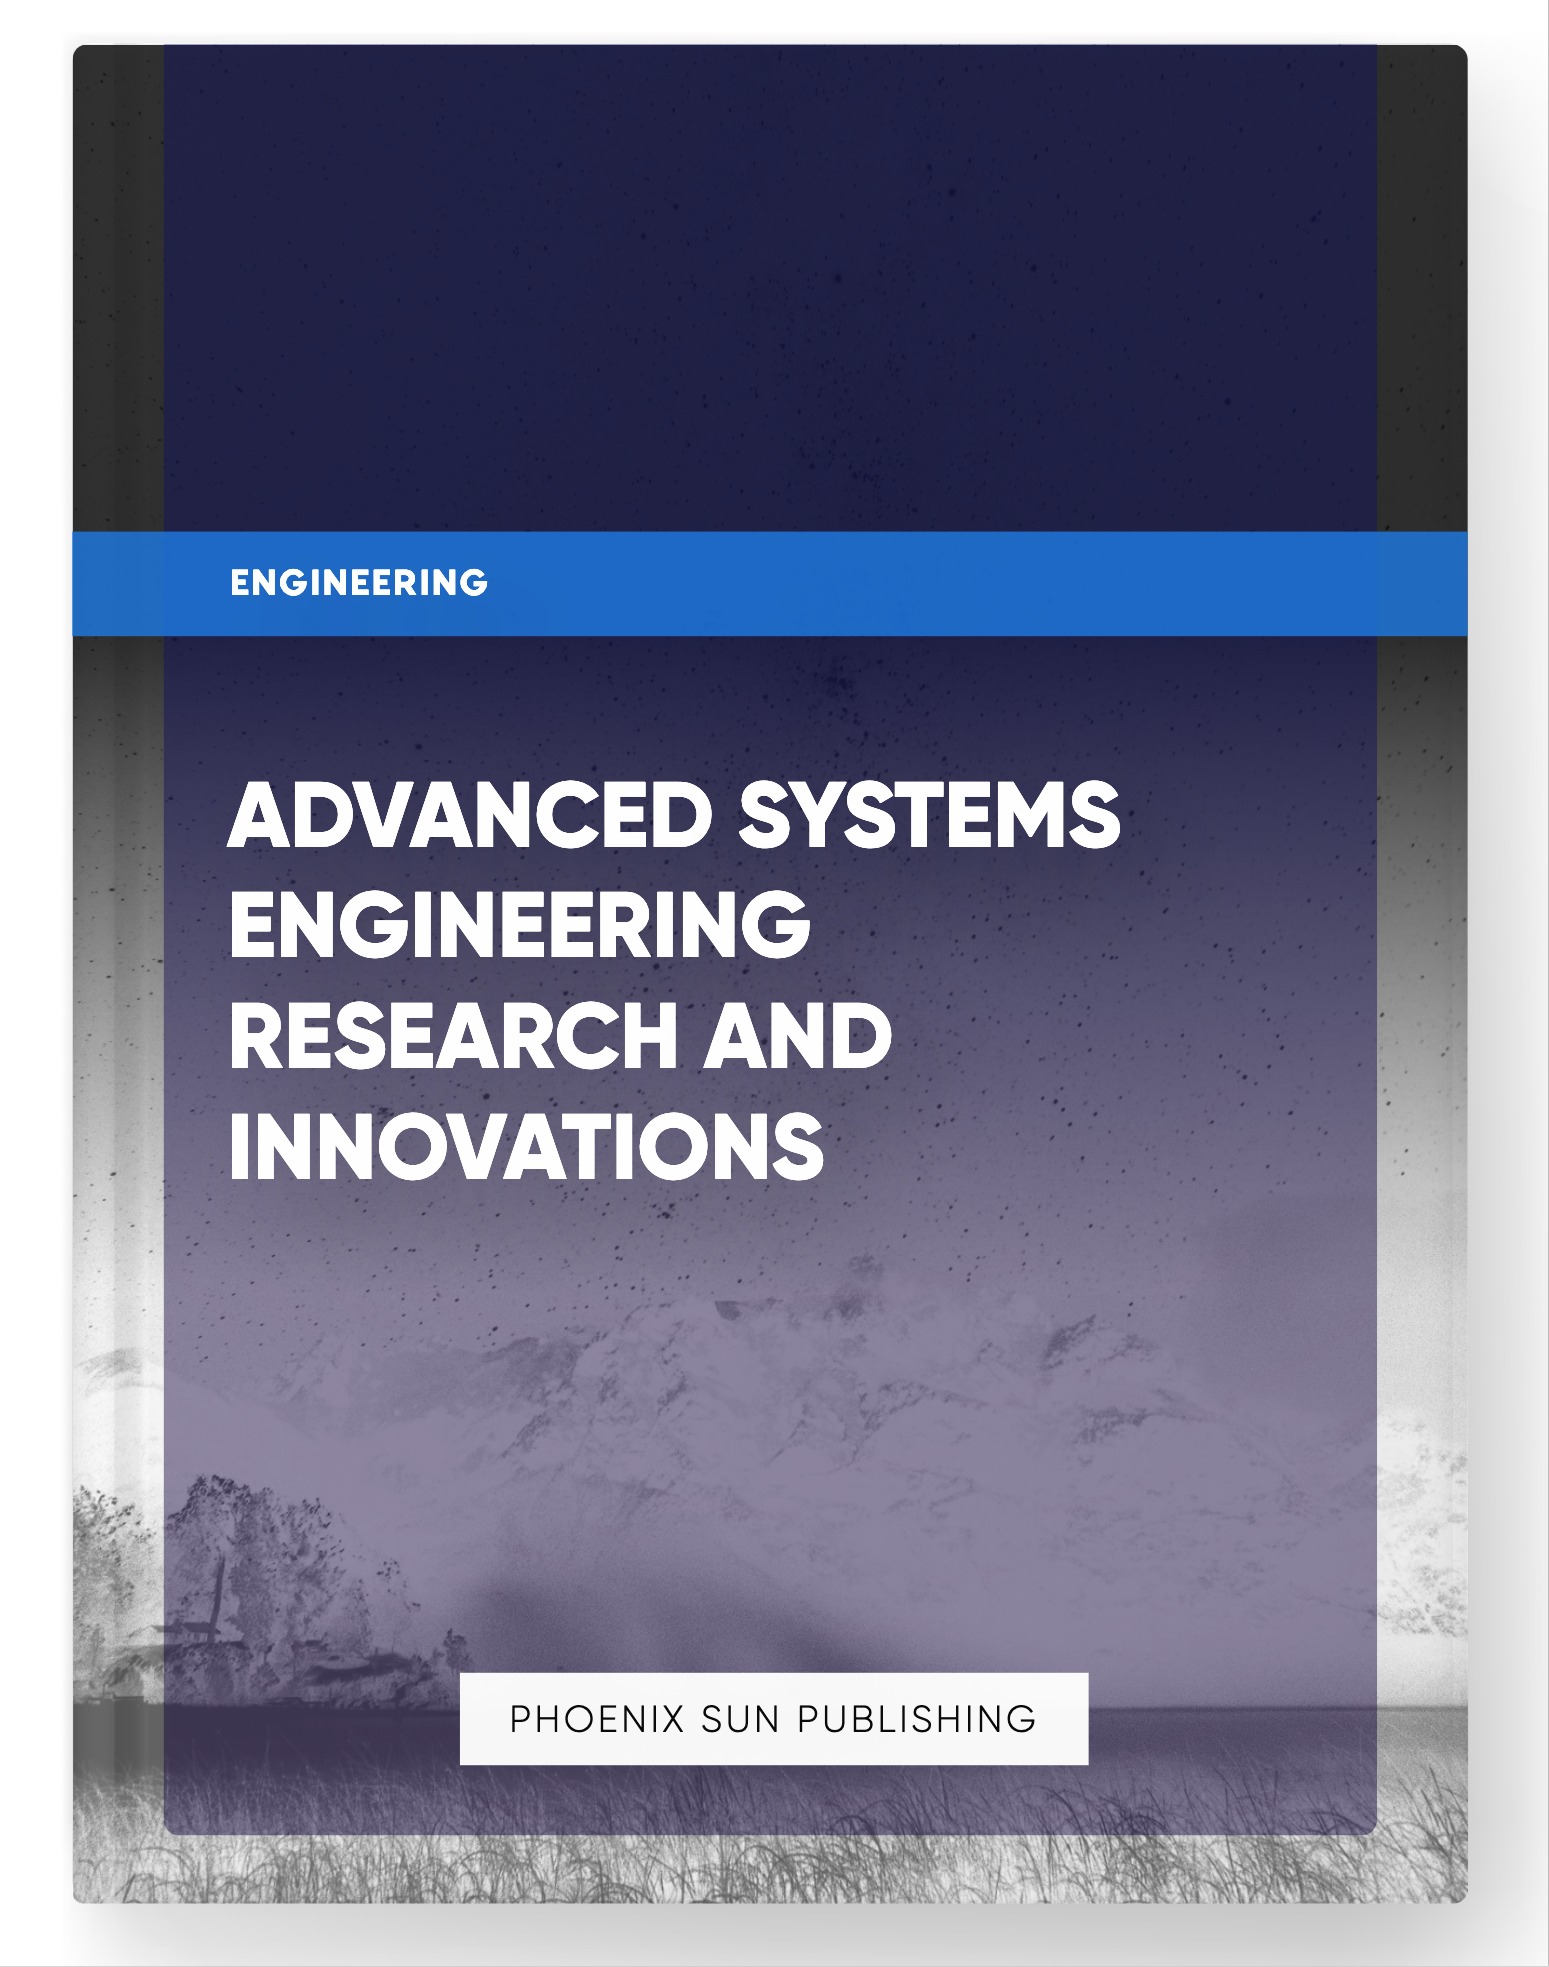 Advanced Systems Engineering Research and Innovations